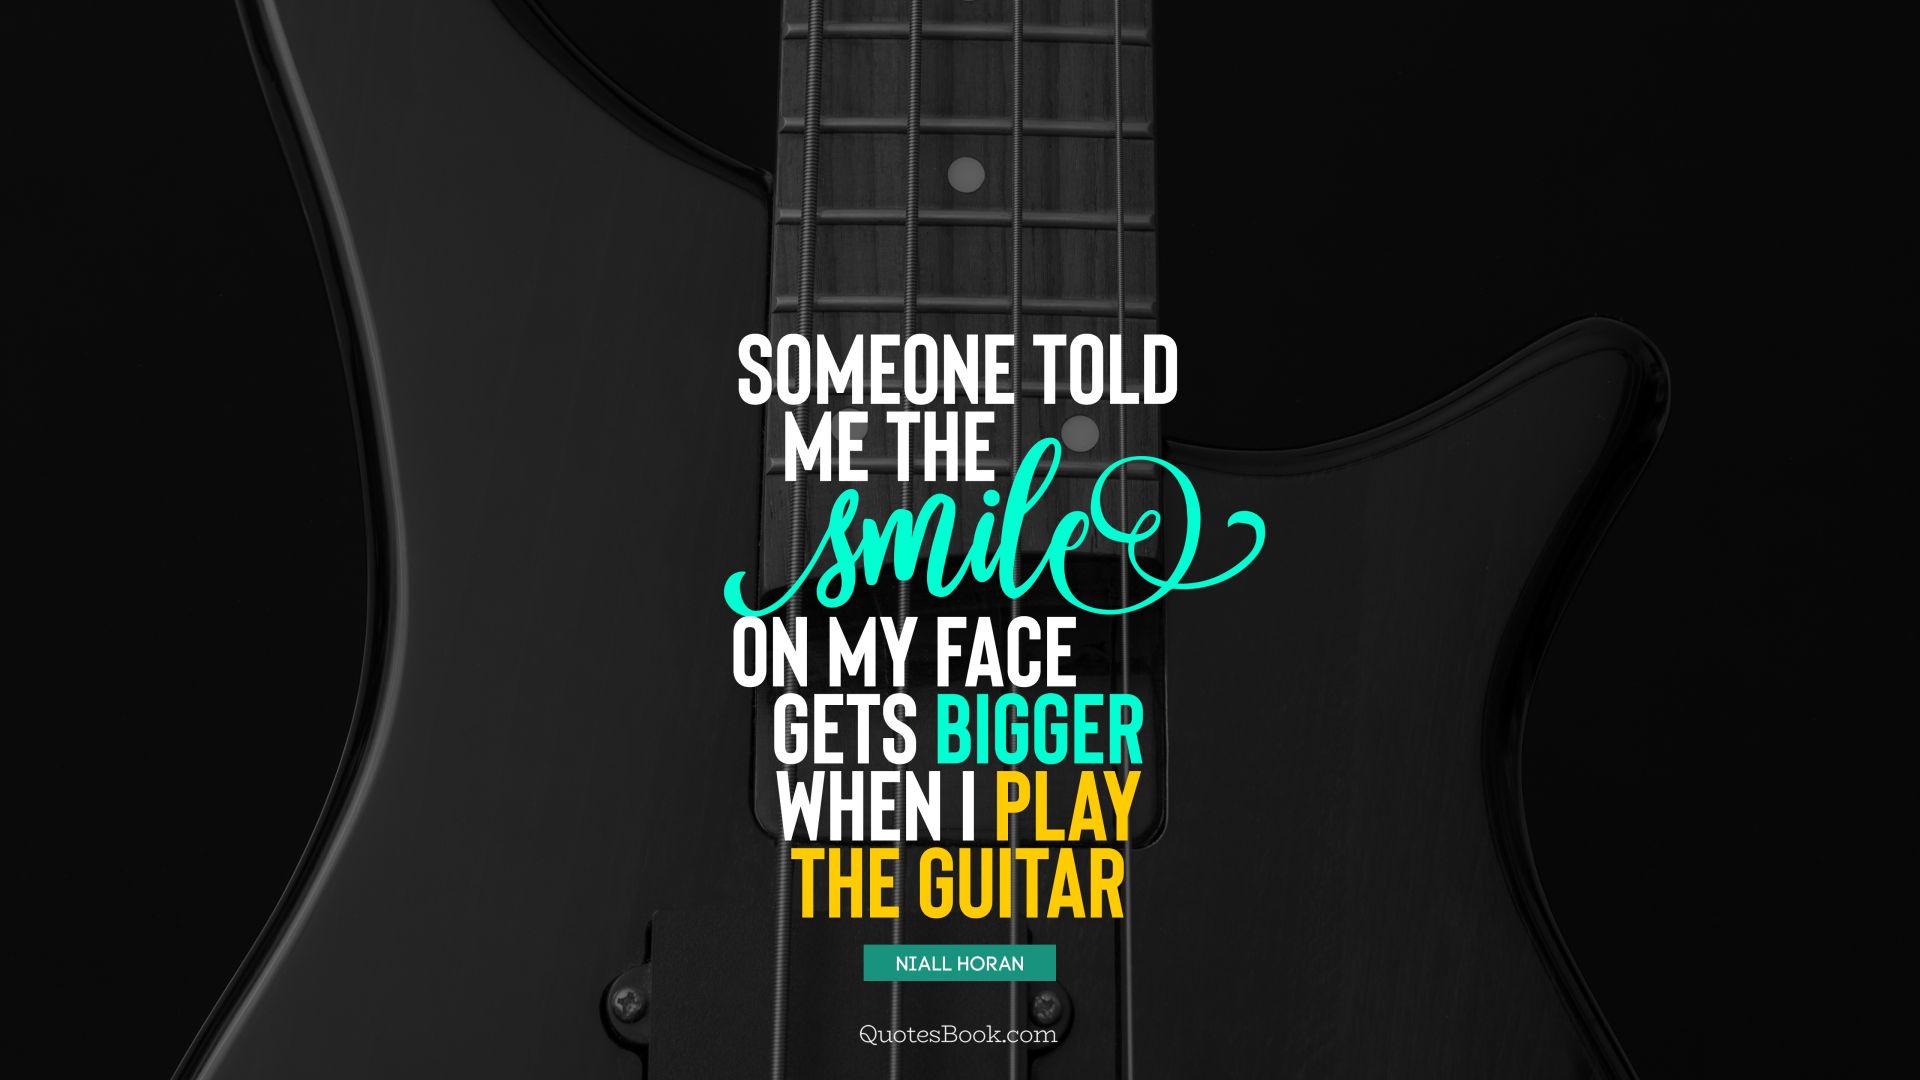 Someone told me the smile on my face gets bigger when I play the guitar. - Quote by Niall Horan